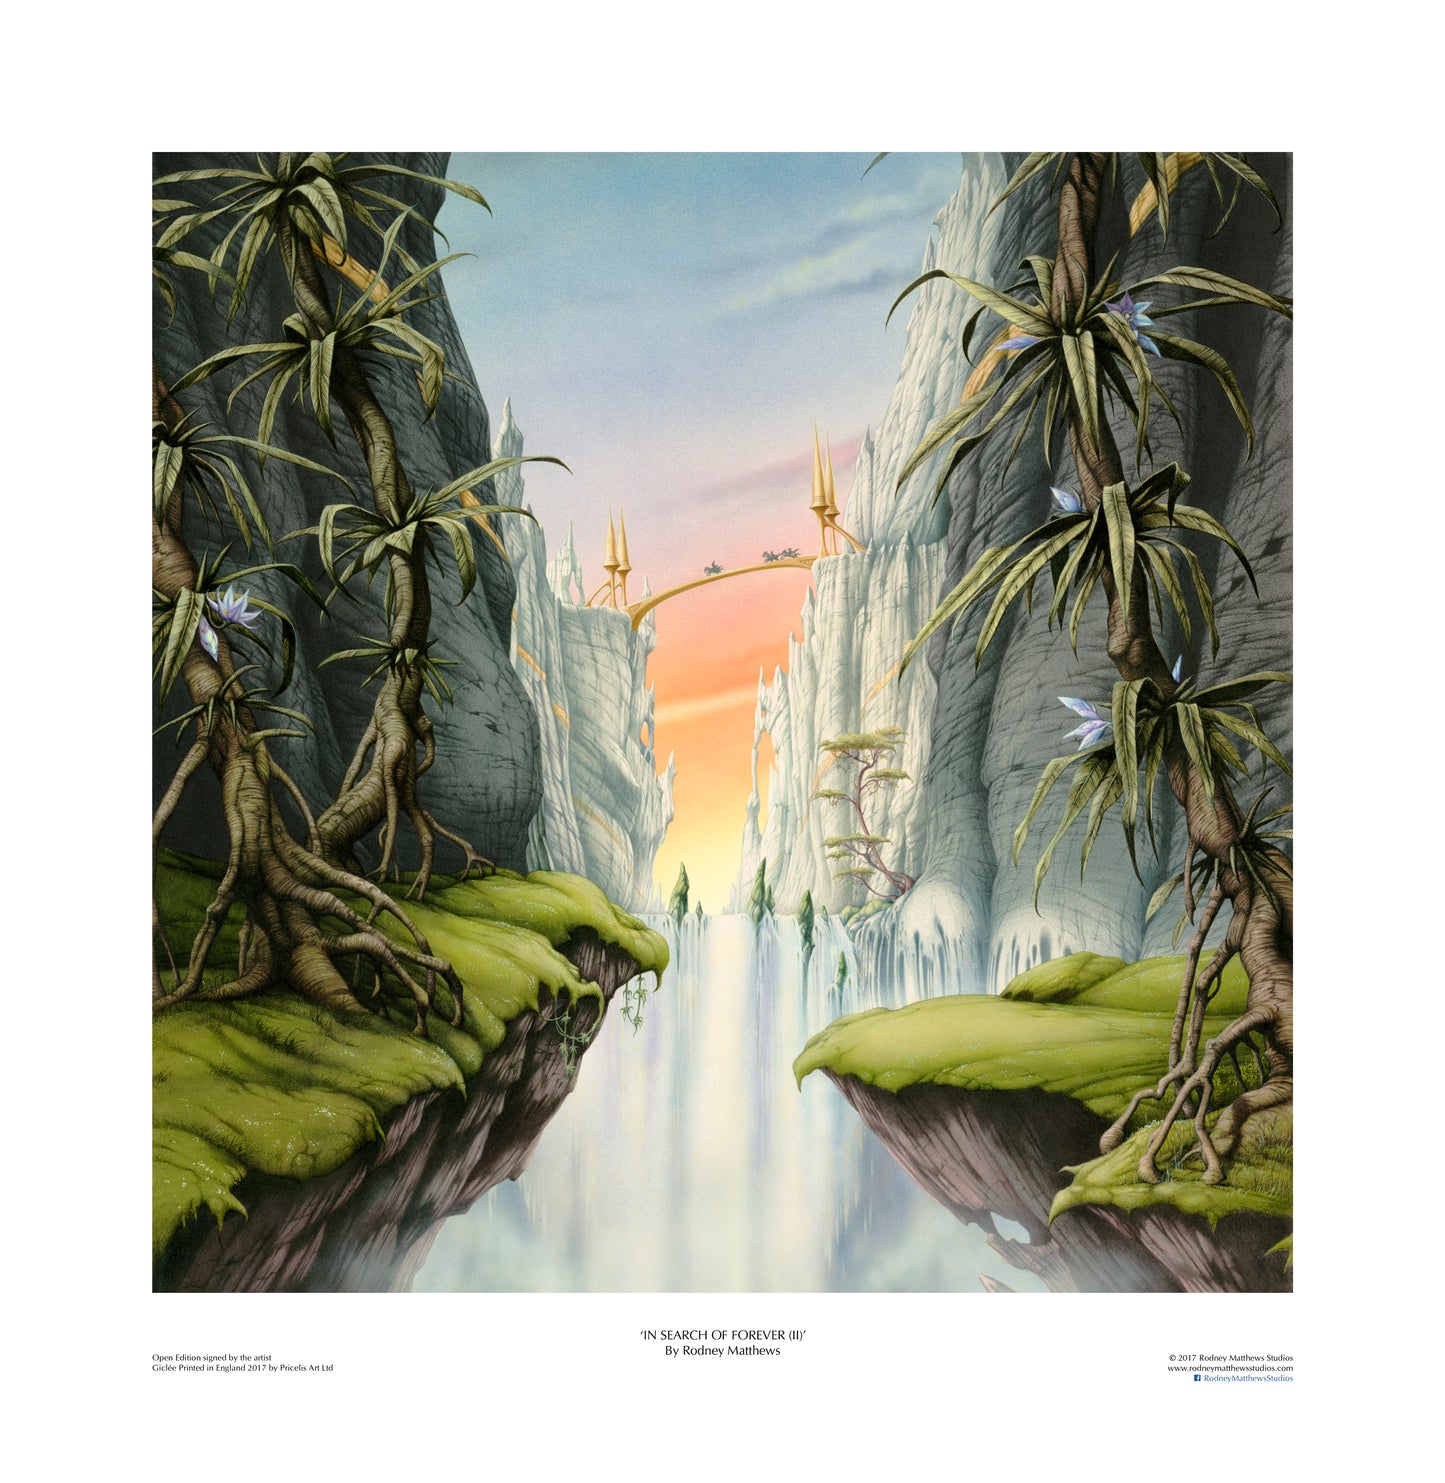 In Search of Forever (II) open edition print, hand-signed by Rodney Matthews